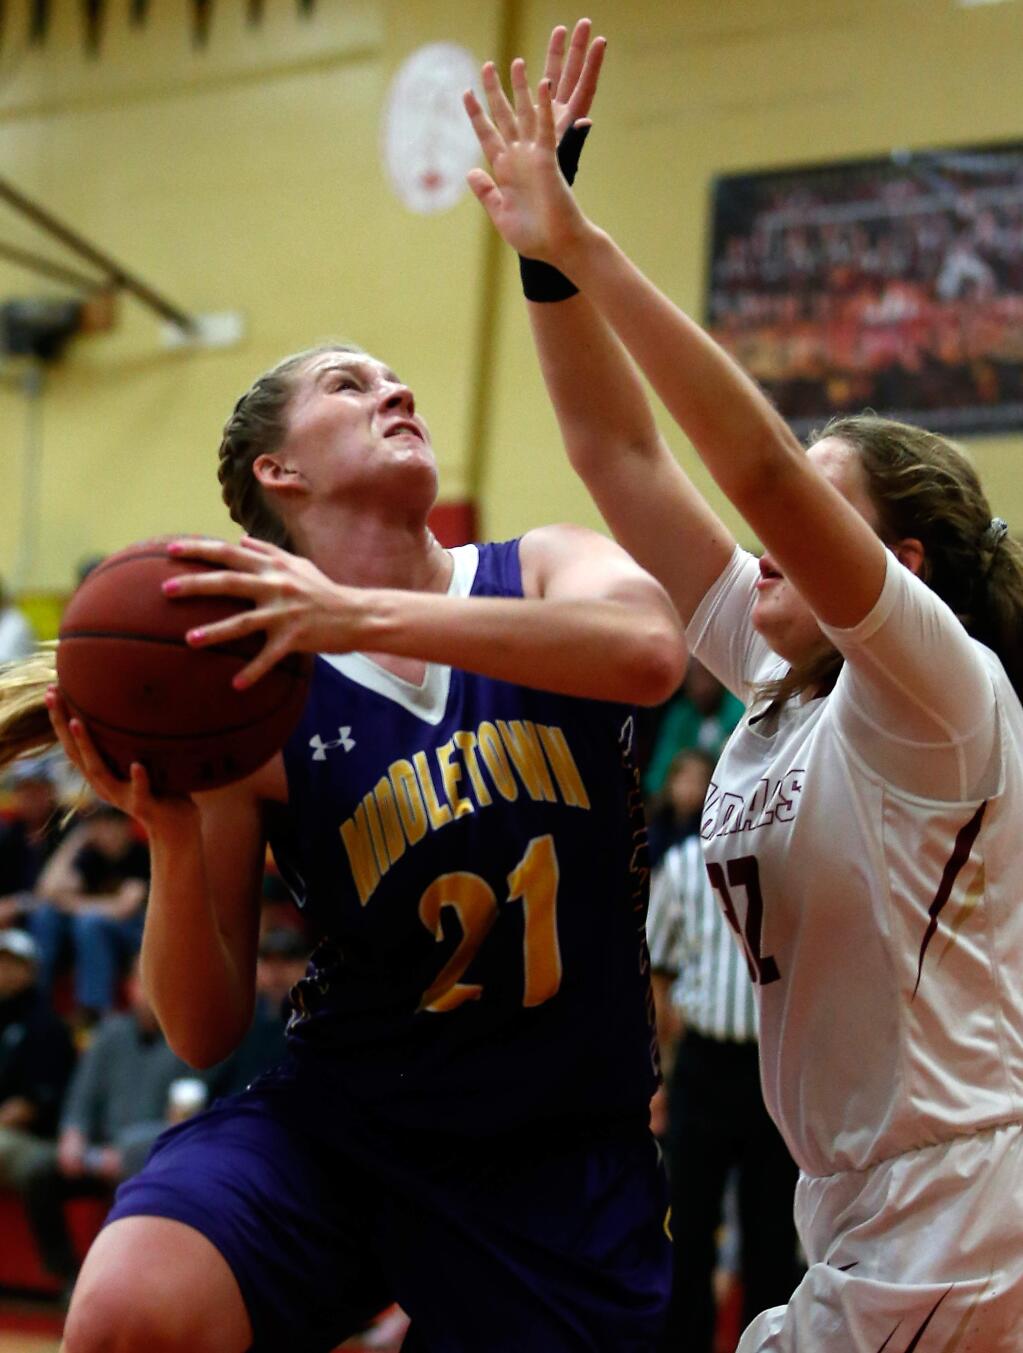 Middletown's Ashlyn Welton (21) drives to the basket while defended by Cardinal Newman's Taylor Hextrum (32) during the first half of the NCS Division 4 girls basketball quarterfinal game between Middletown and Cardinal Newman high schools in Santa Rosa, California, on Saturday, February 27, 2016. (Alvin Jornada / The Press Democrat)